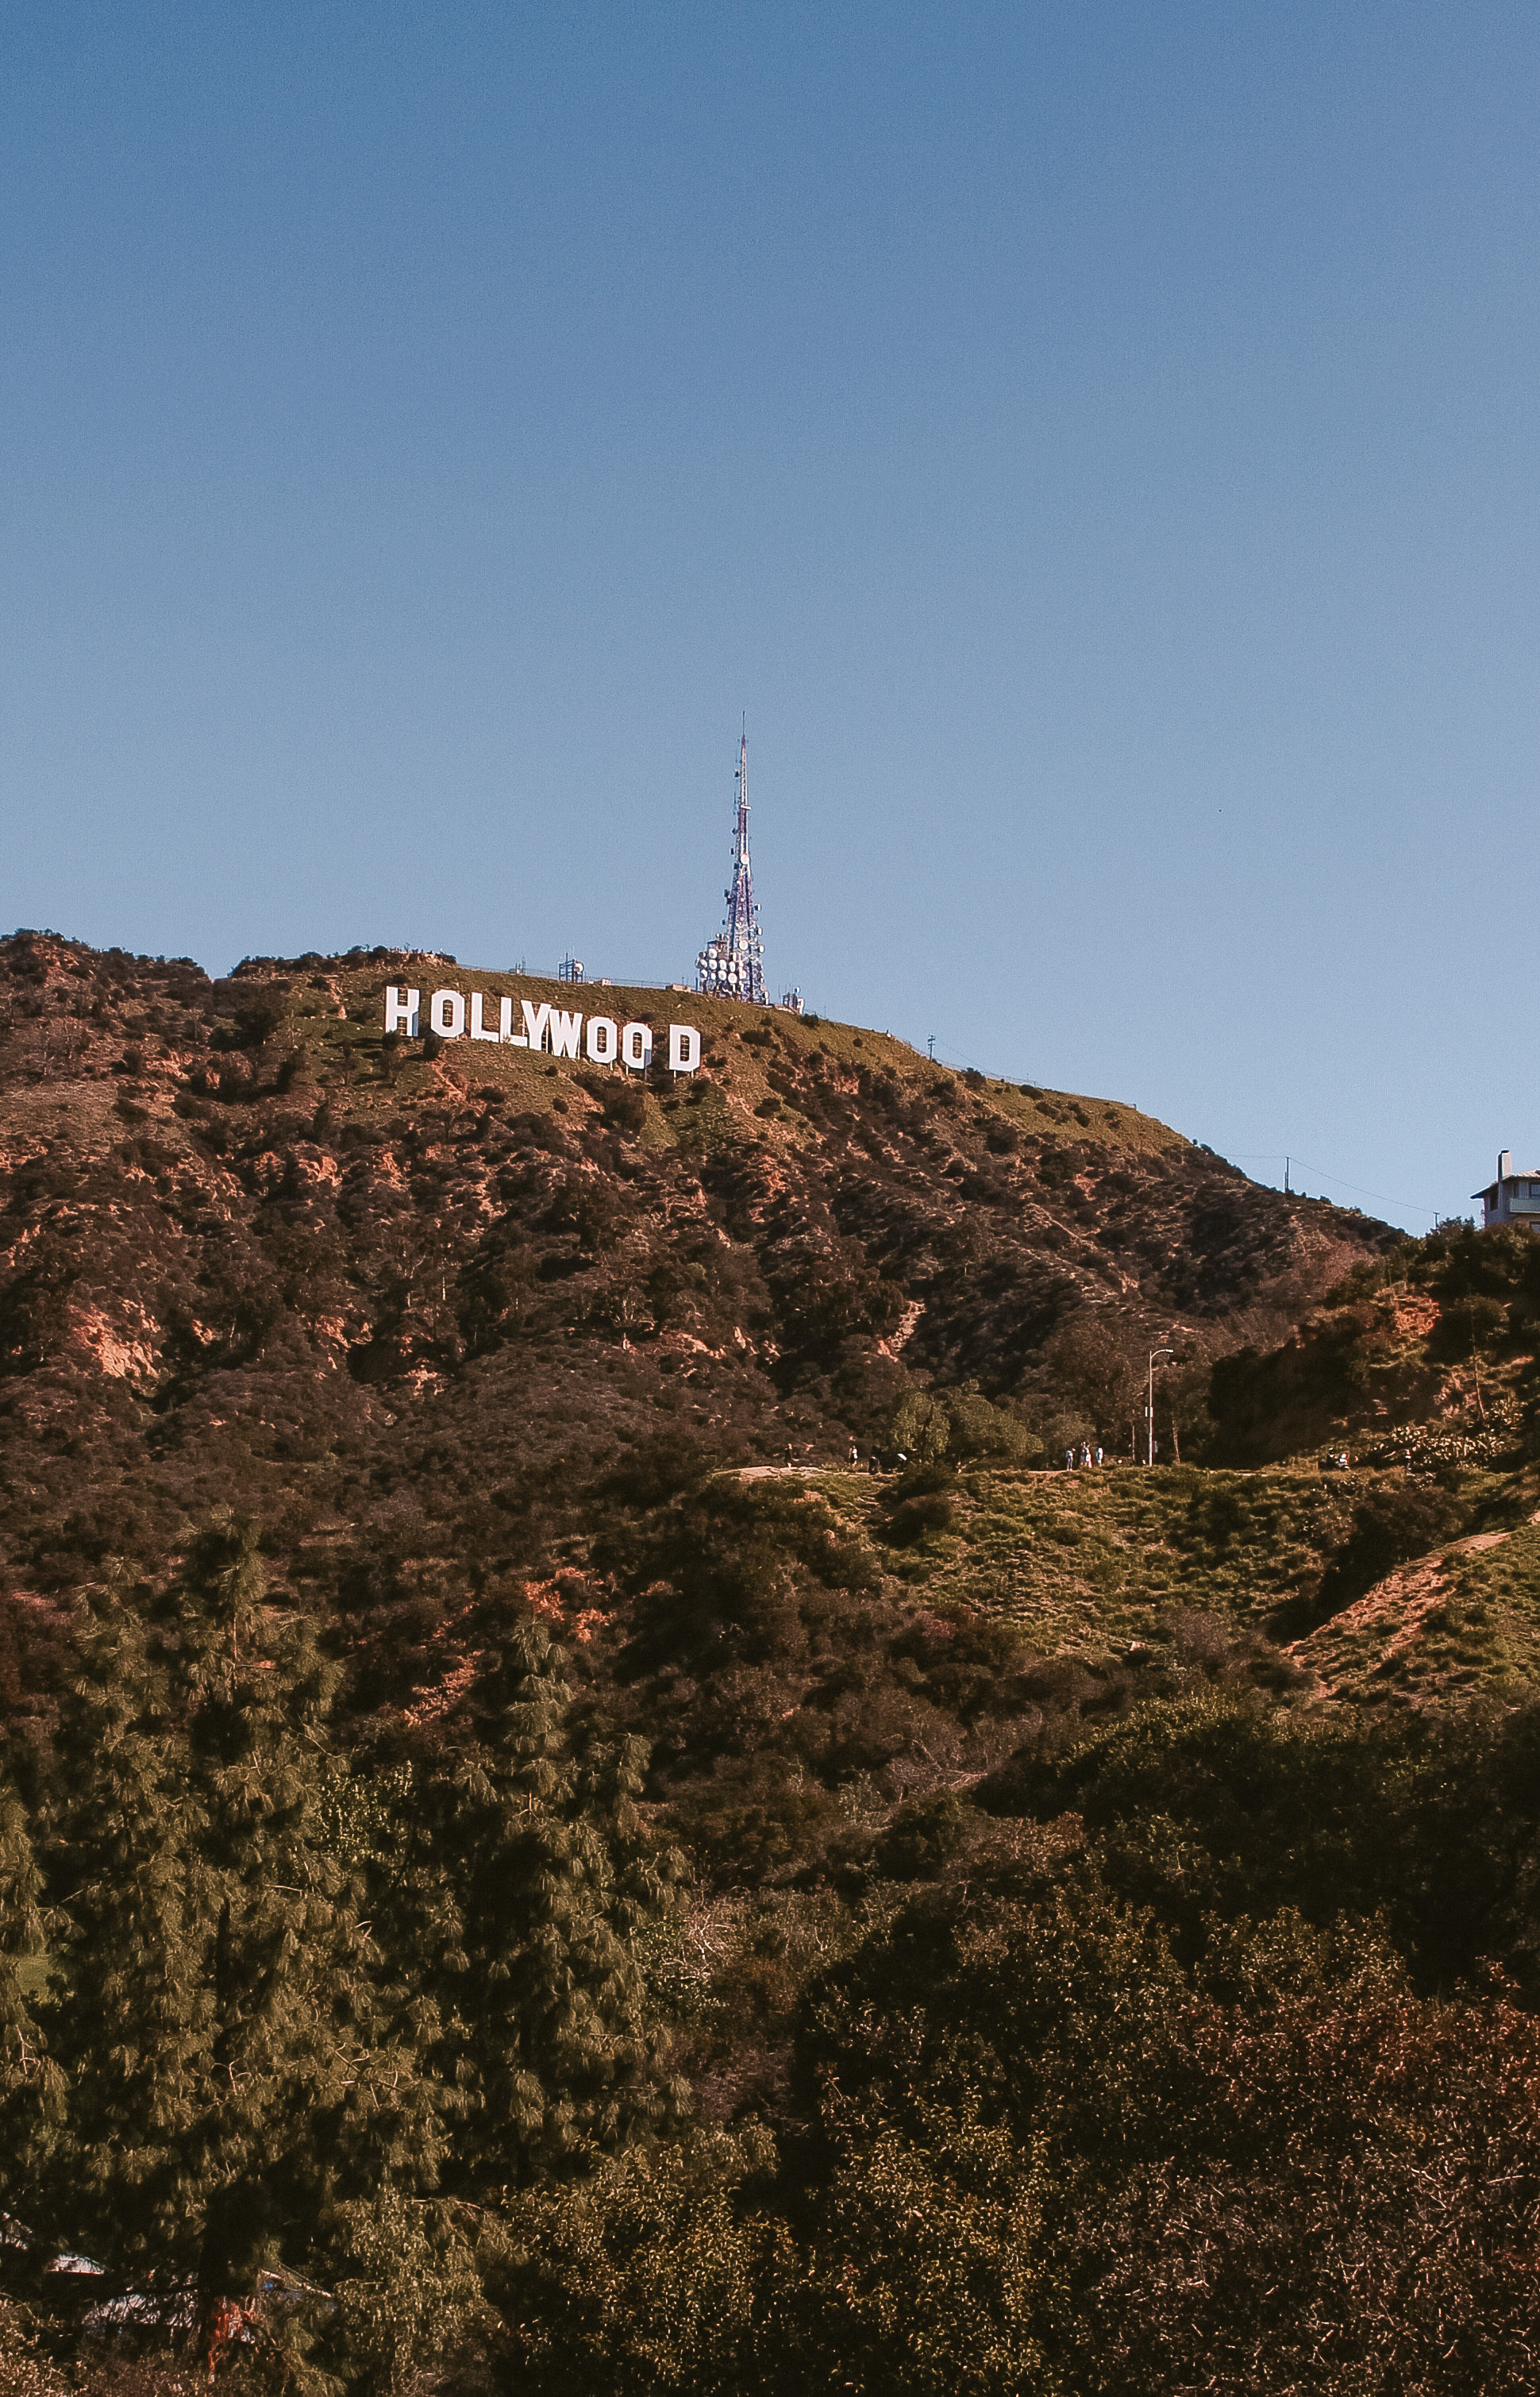 Hollywood Sign: Originally created in 1923 as a temporary advertisement for a local real estate development in Los Angeles. 1940x3020 HD Background.